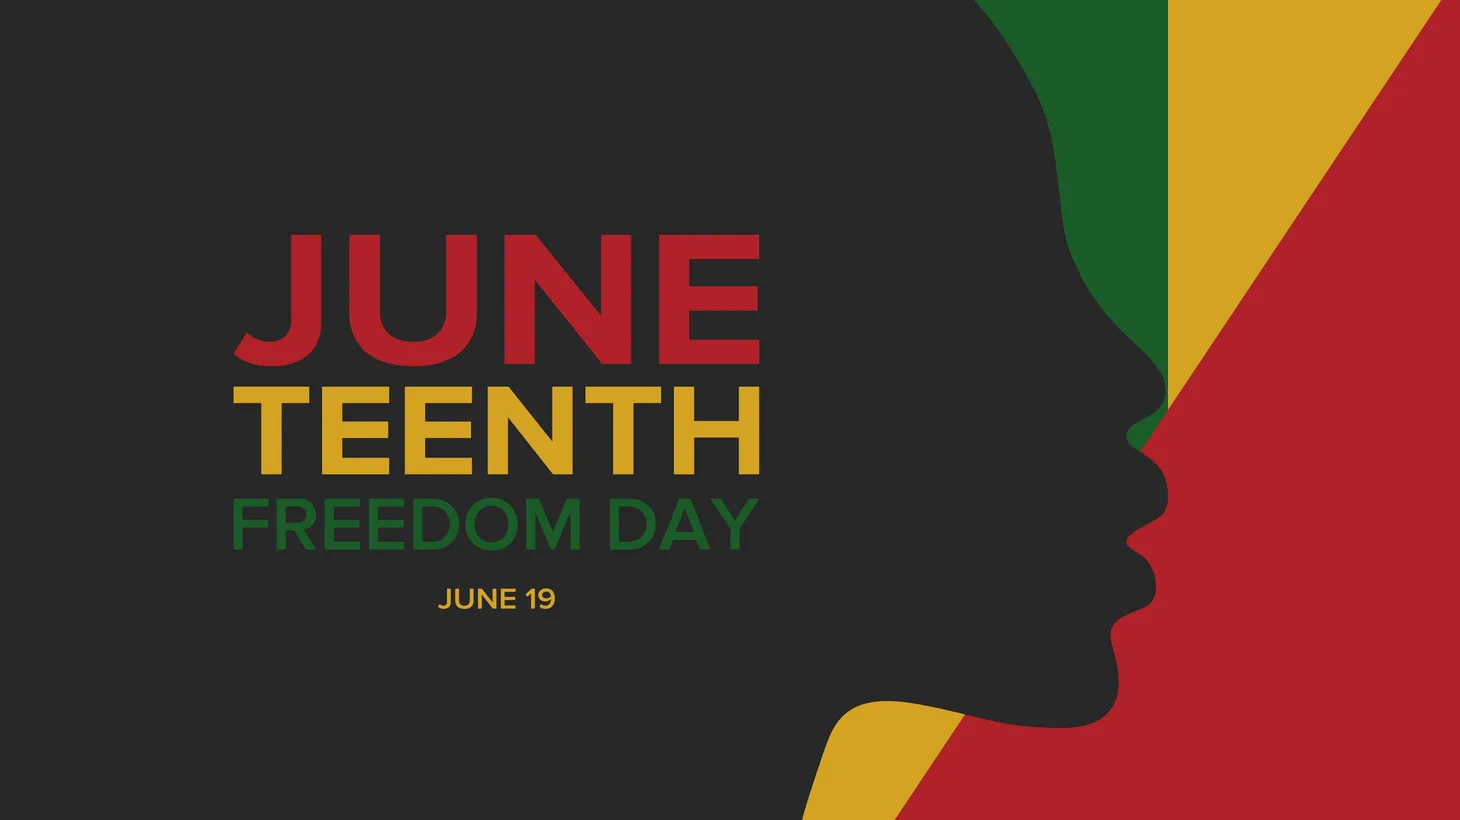 Whether you like history, food, music or art, there are dozens of Juneteenth celebrations to pick from this weekend in LA.